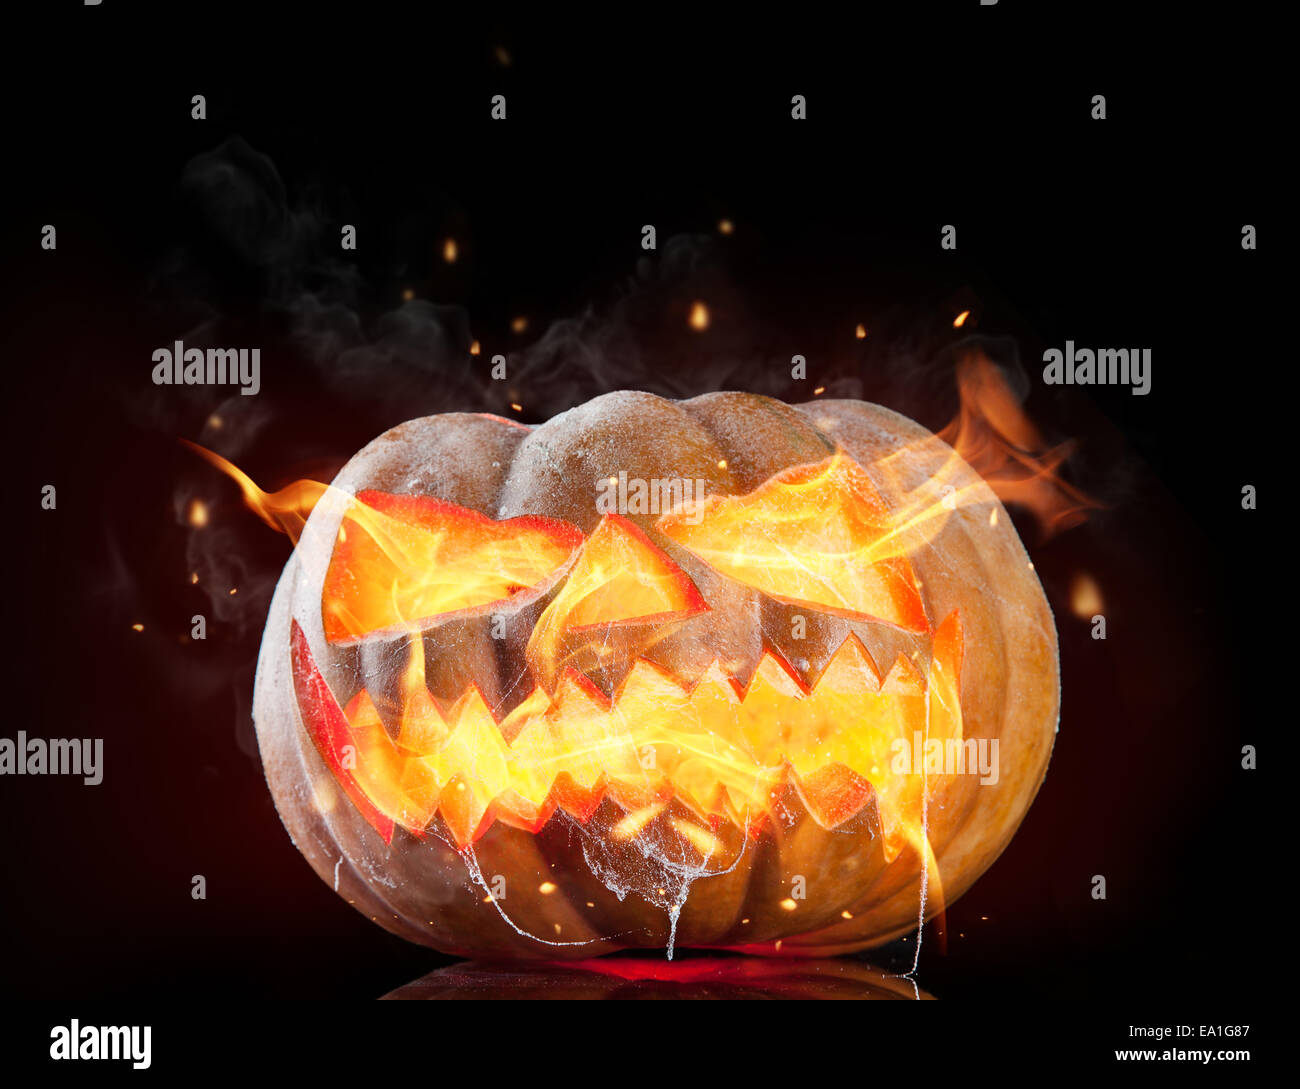 Halloween pumpkin with fire flames isolated on black background Stock Photo